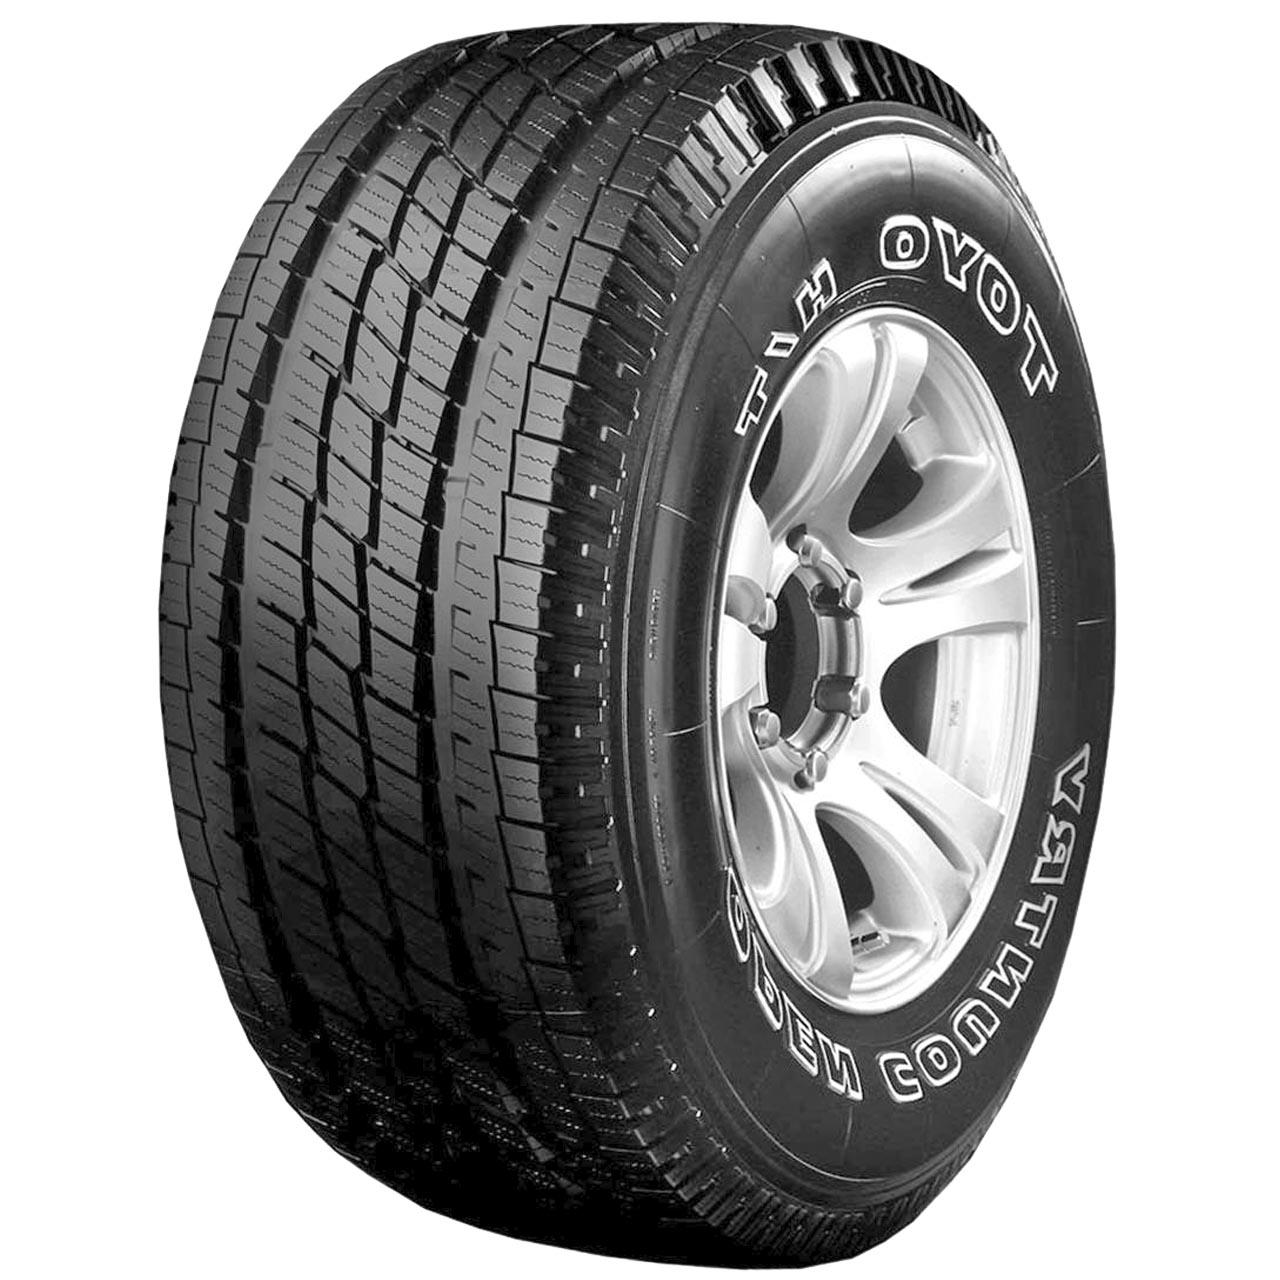 Toyo Open Country HT 245/75R16C 120S M+S